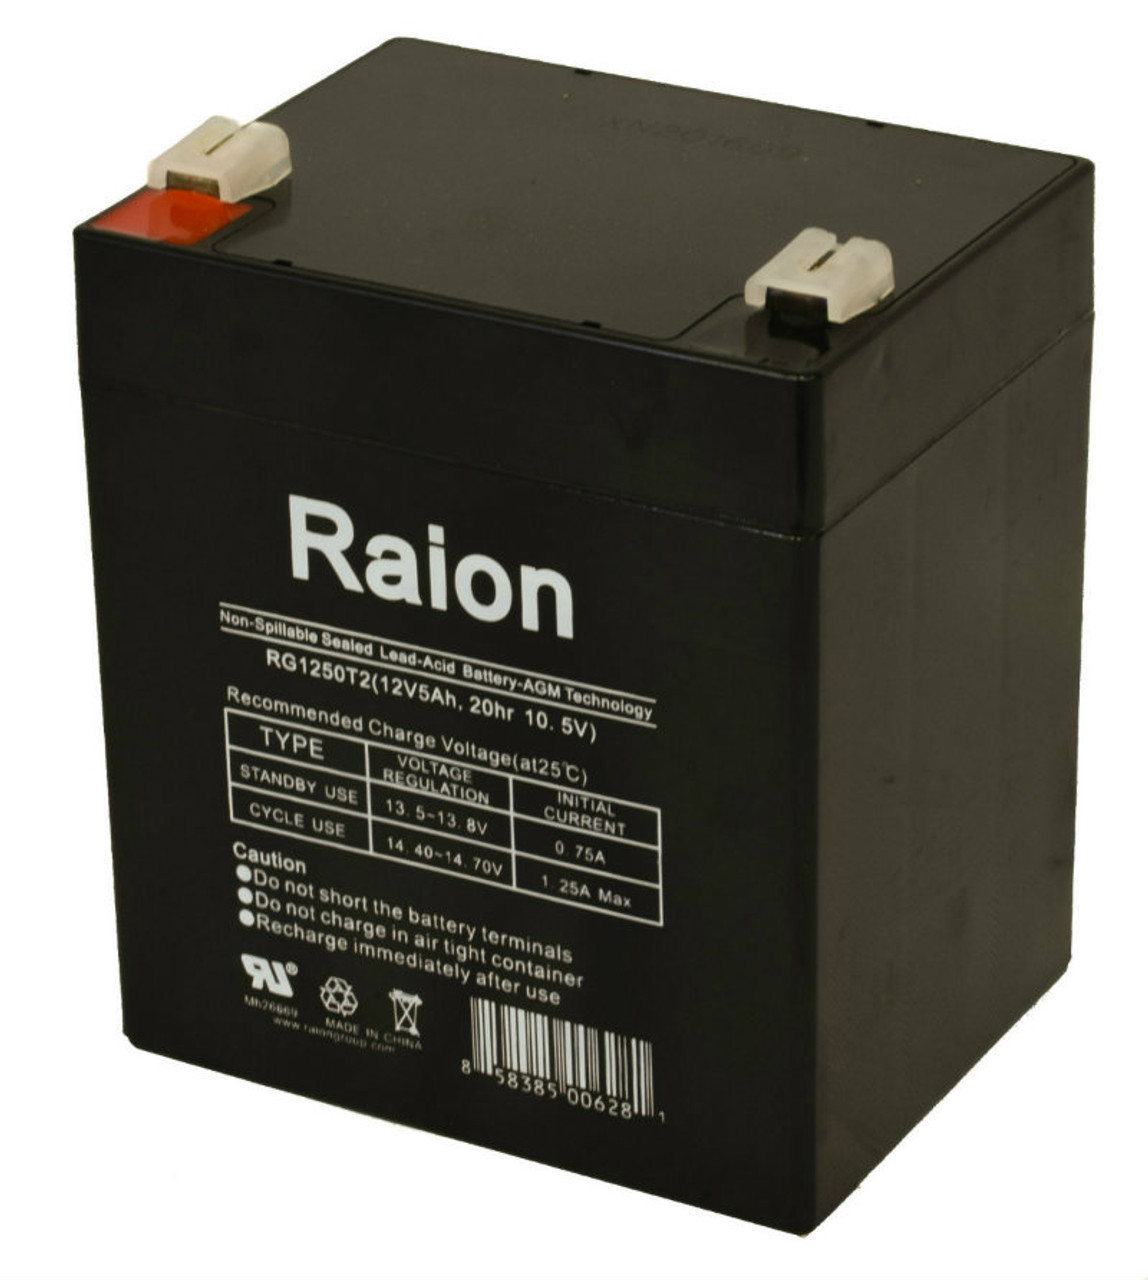 Raion Power 12V 5Ah Replacement Fire Alarm Control Panel Battery for ADT Security Alarm Safewatch Pro 3000